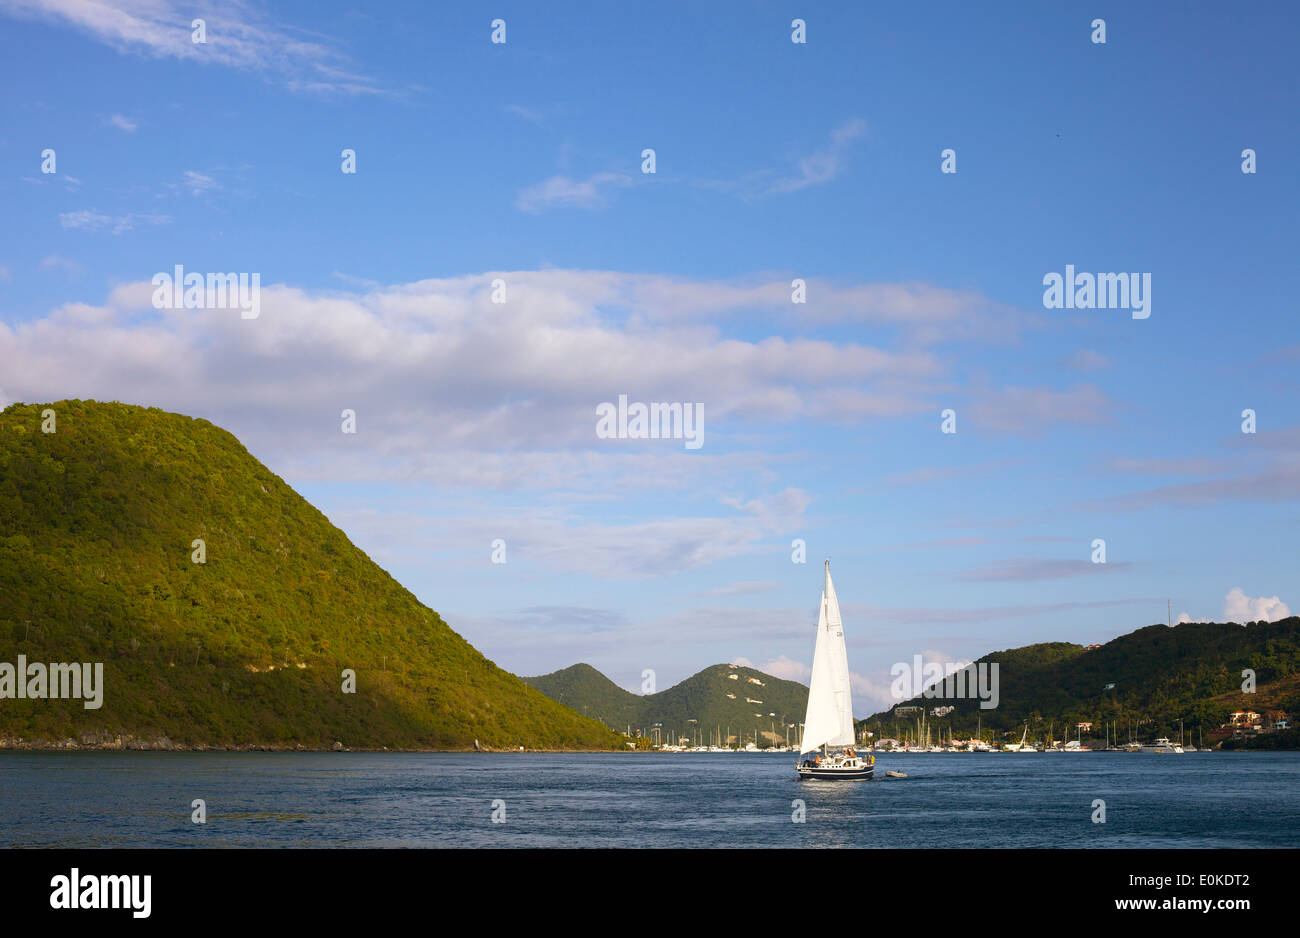 A sailboat cruises on the blue calm ocean in the British Virgin Islands. Stock Photo